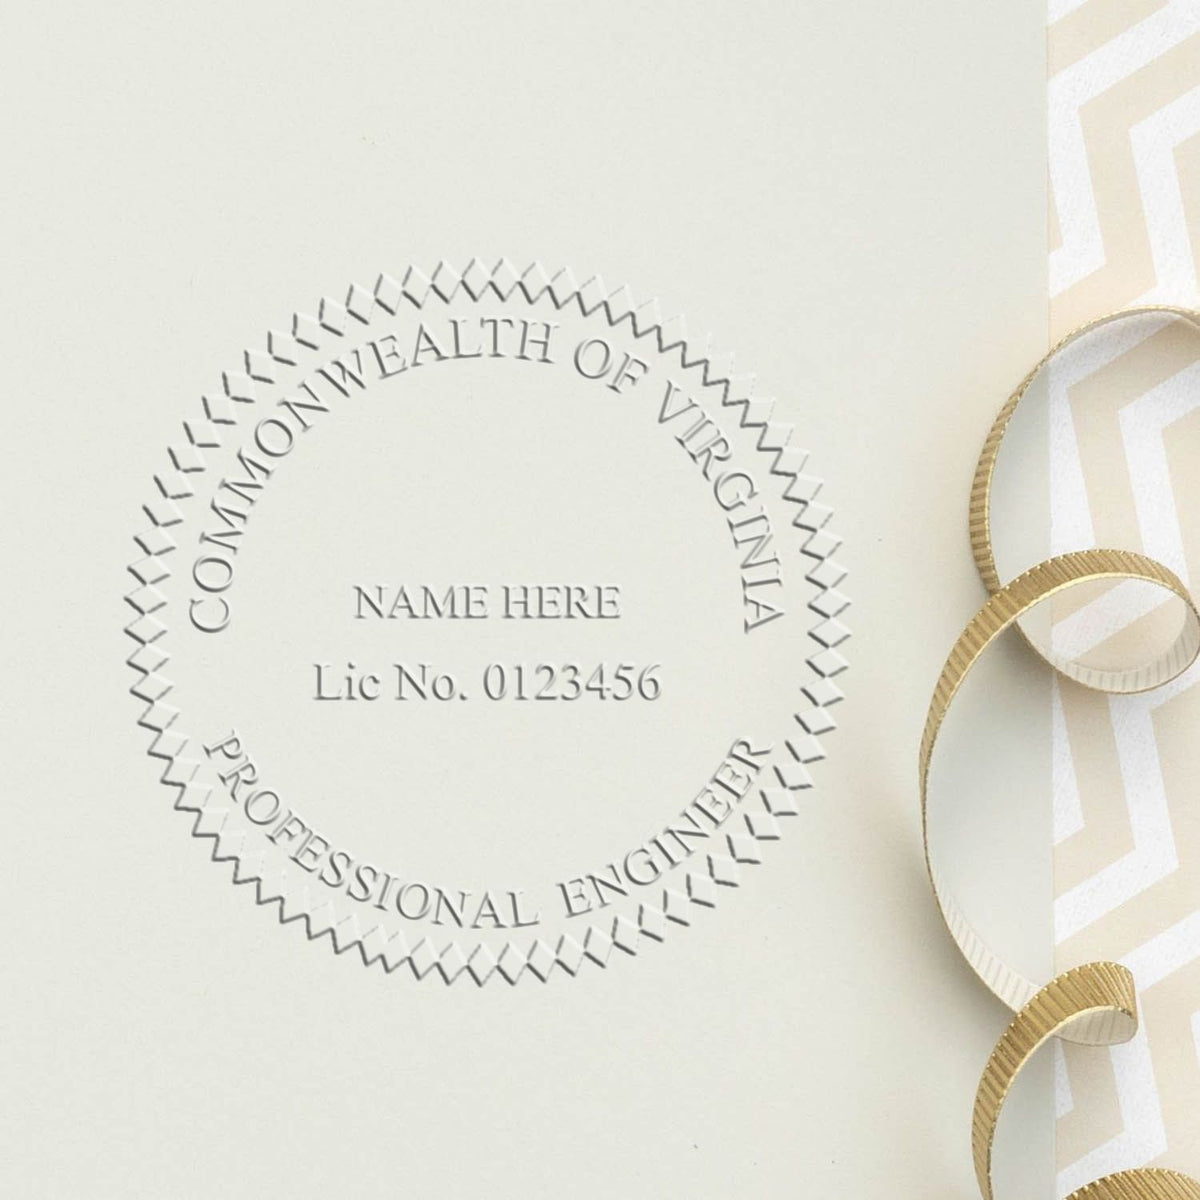 A stamped impression of the Soft Virginia Professional Engineer Seal in this stylish lifestyle photo, setting the tone for a unique and personalized product.